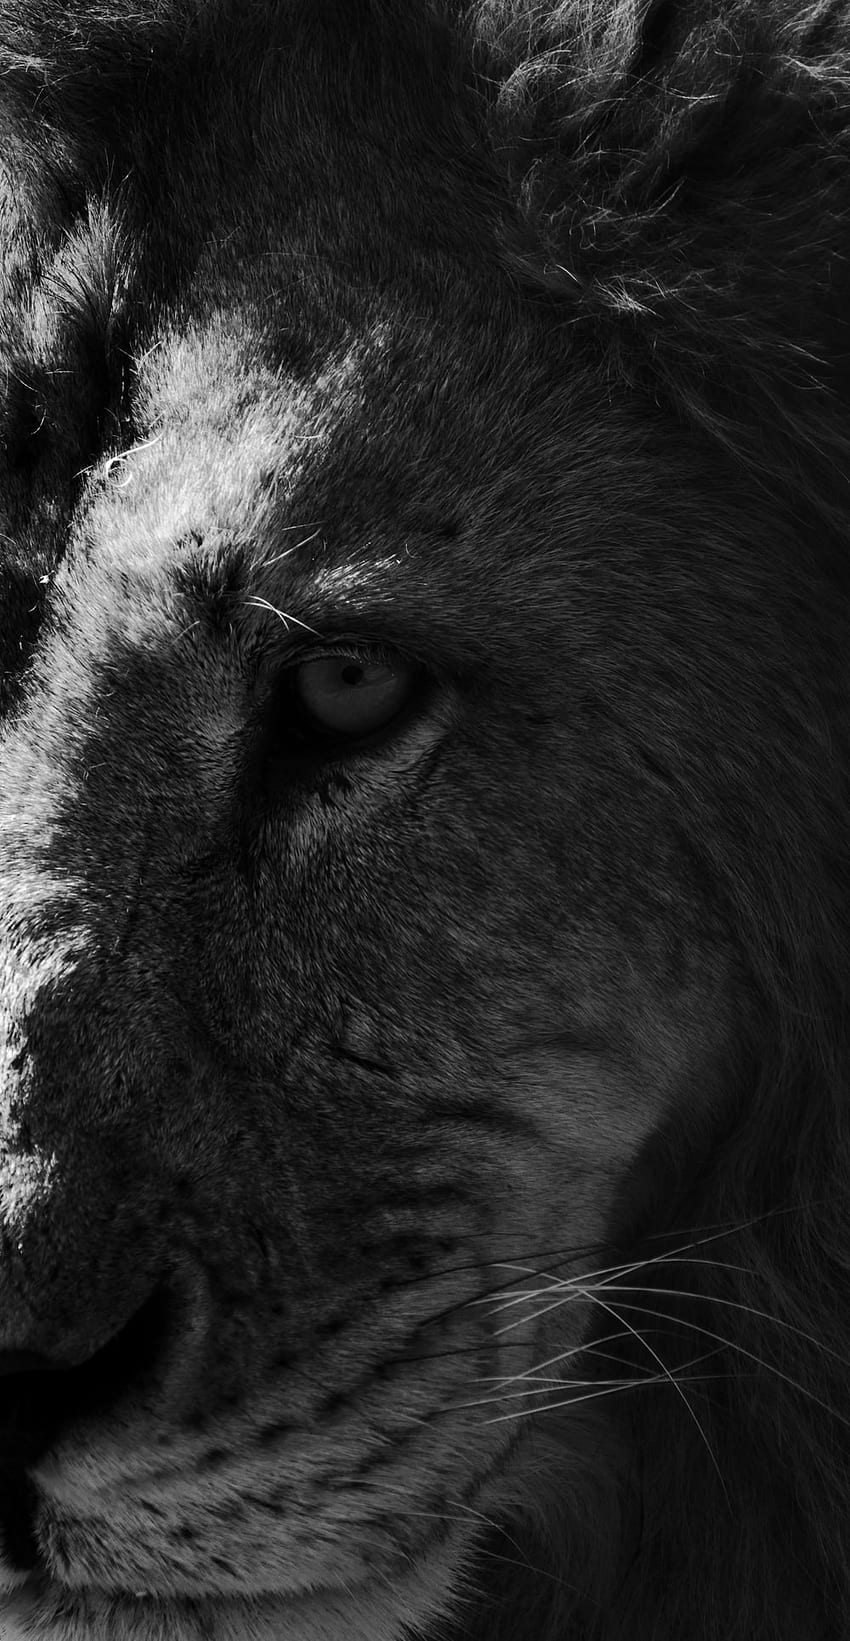 The Black Lion [], Lioness Black and White HD phone wallpaper